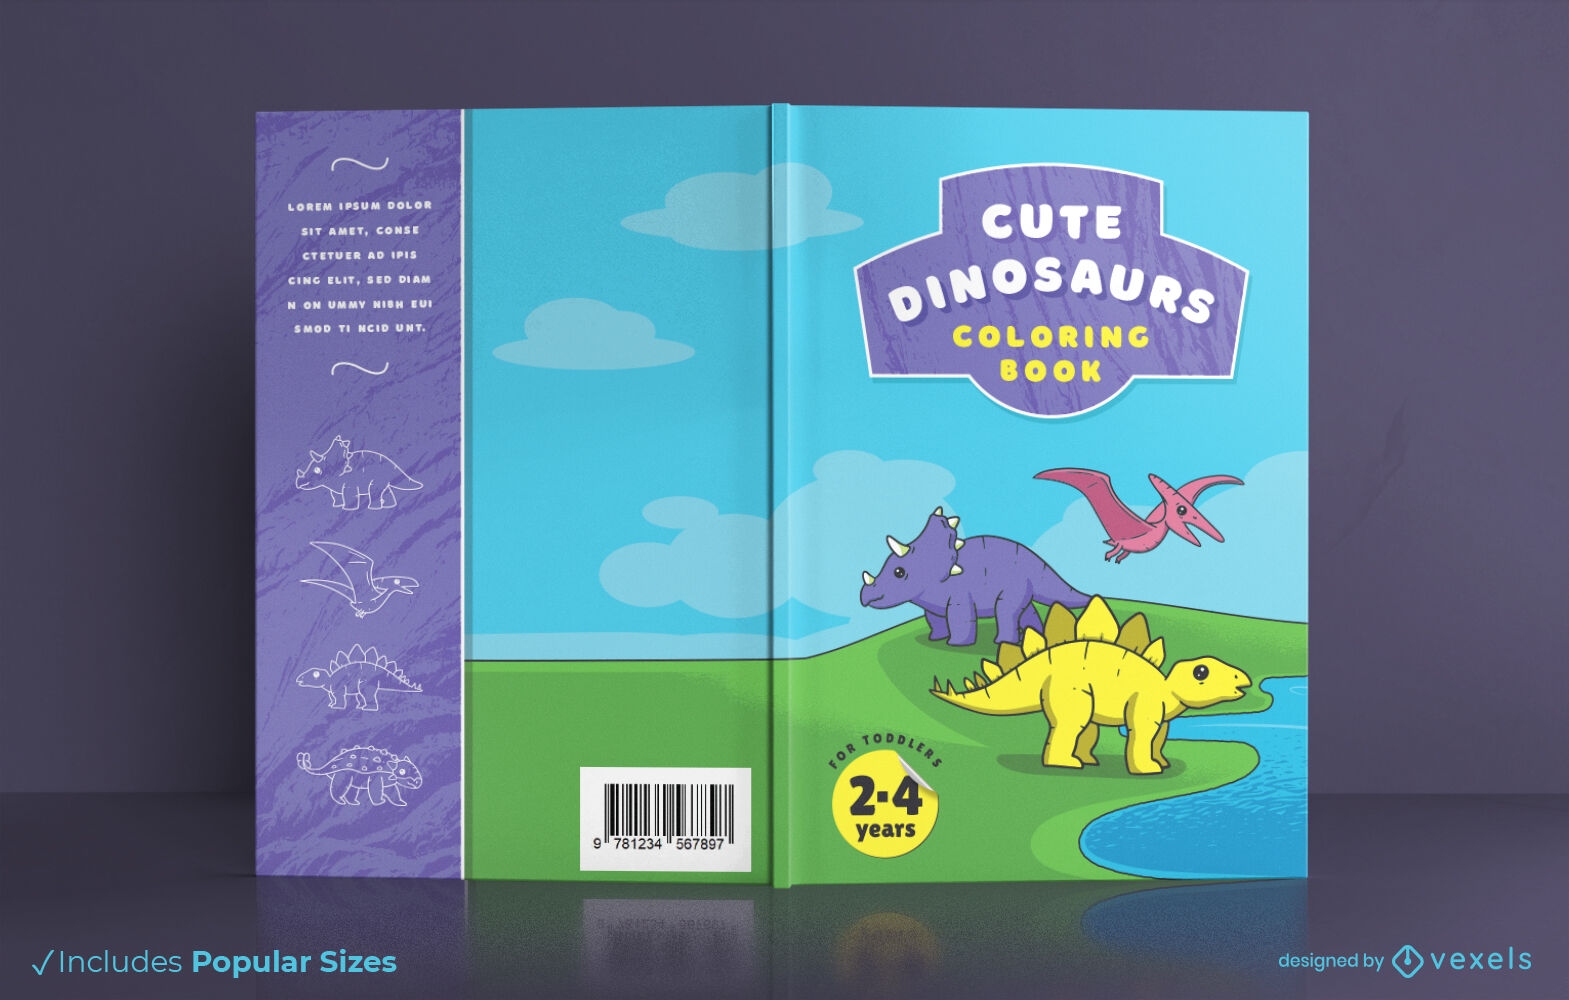 Dinosaurs coloring book cover design